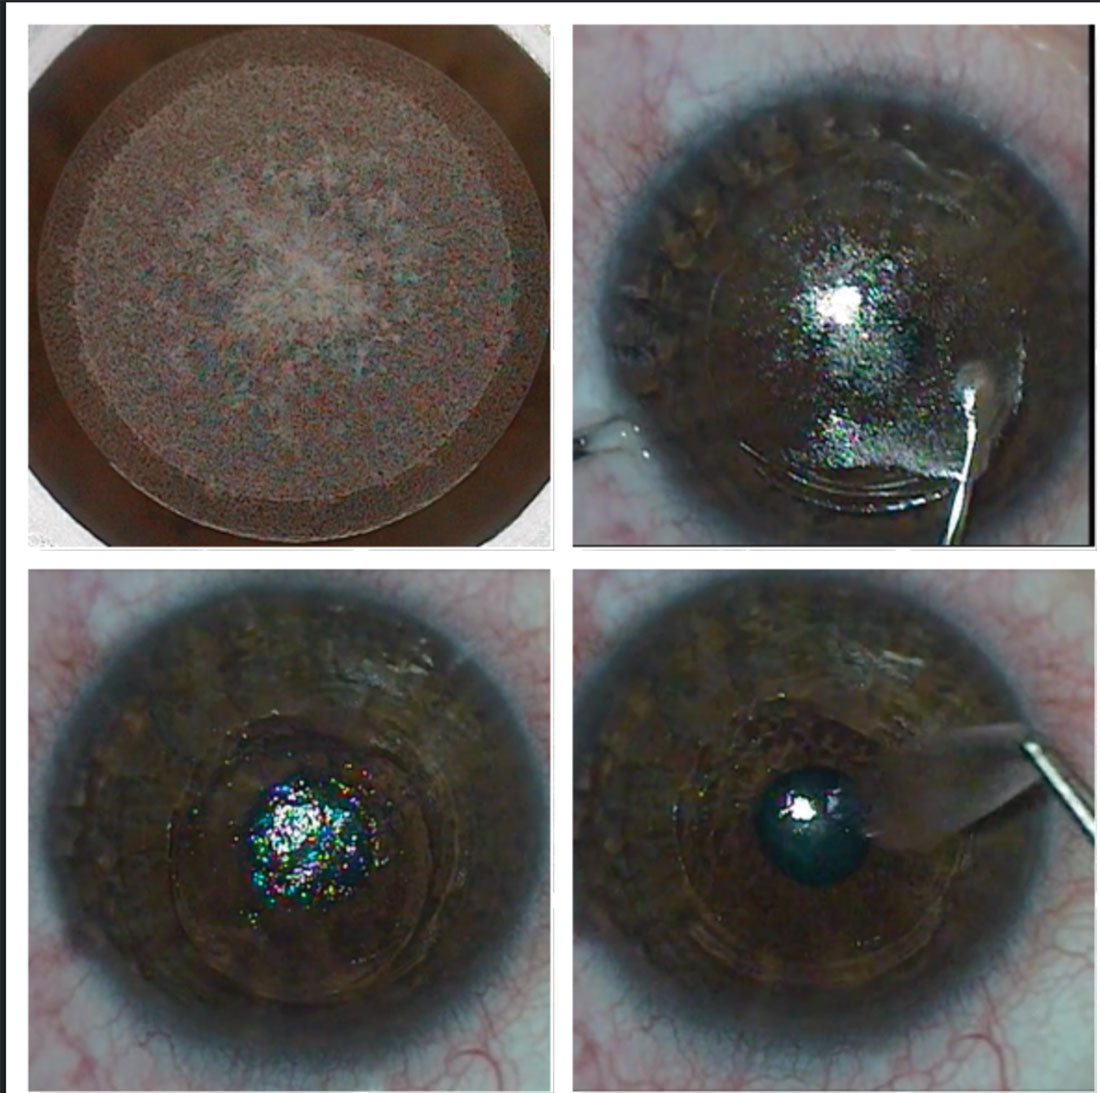 Fig. 4. The SMILE procedure creates (top left), dissects (top right) and removes a lenticule (bottom left and right) to correct myopia and myopic astigmatism.